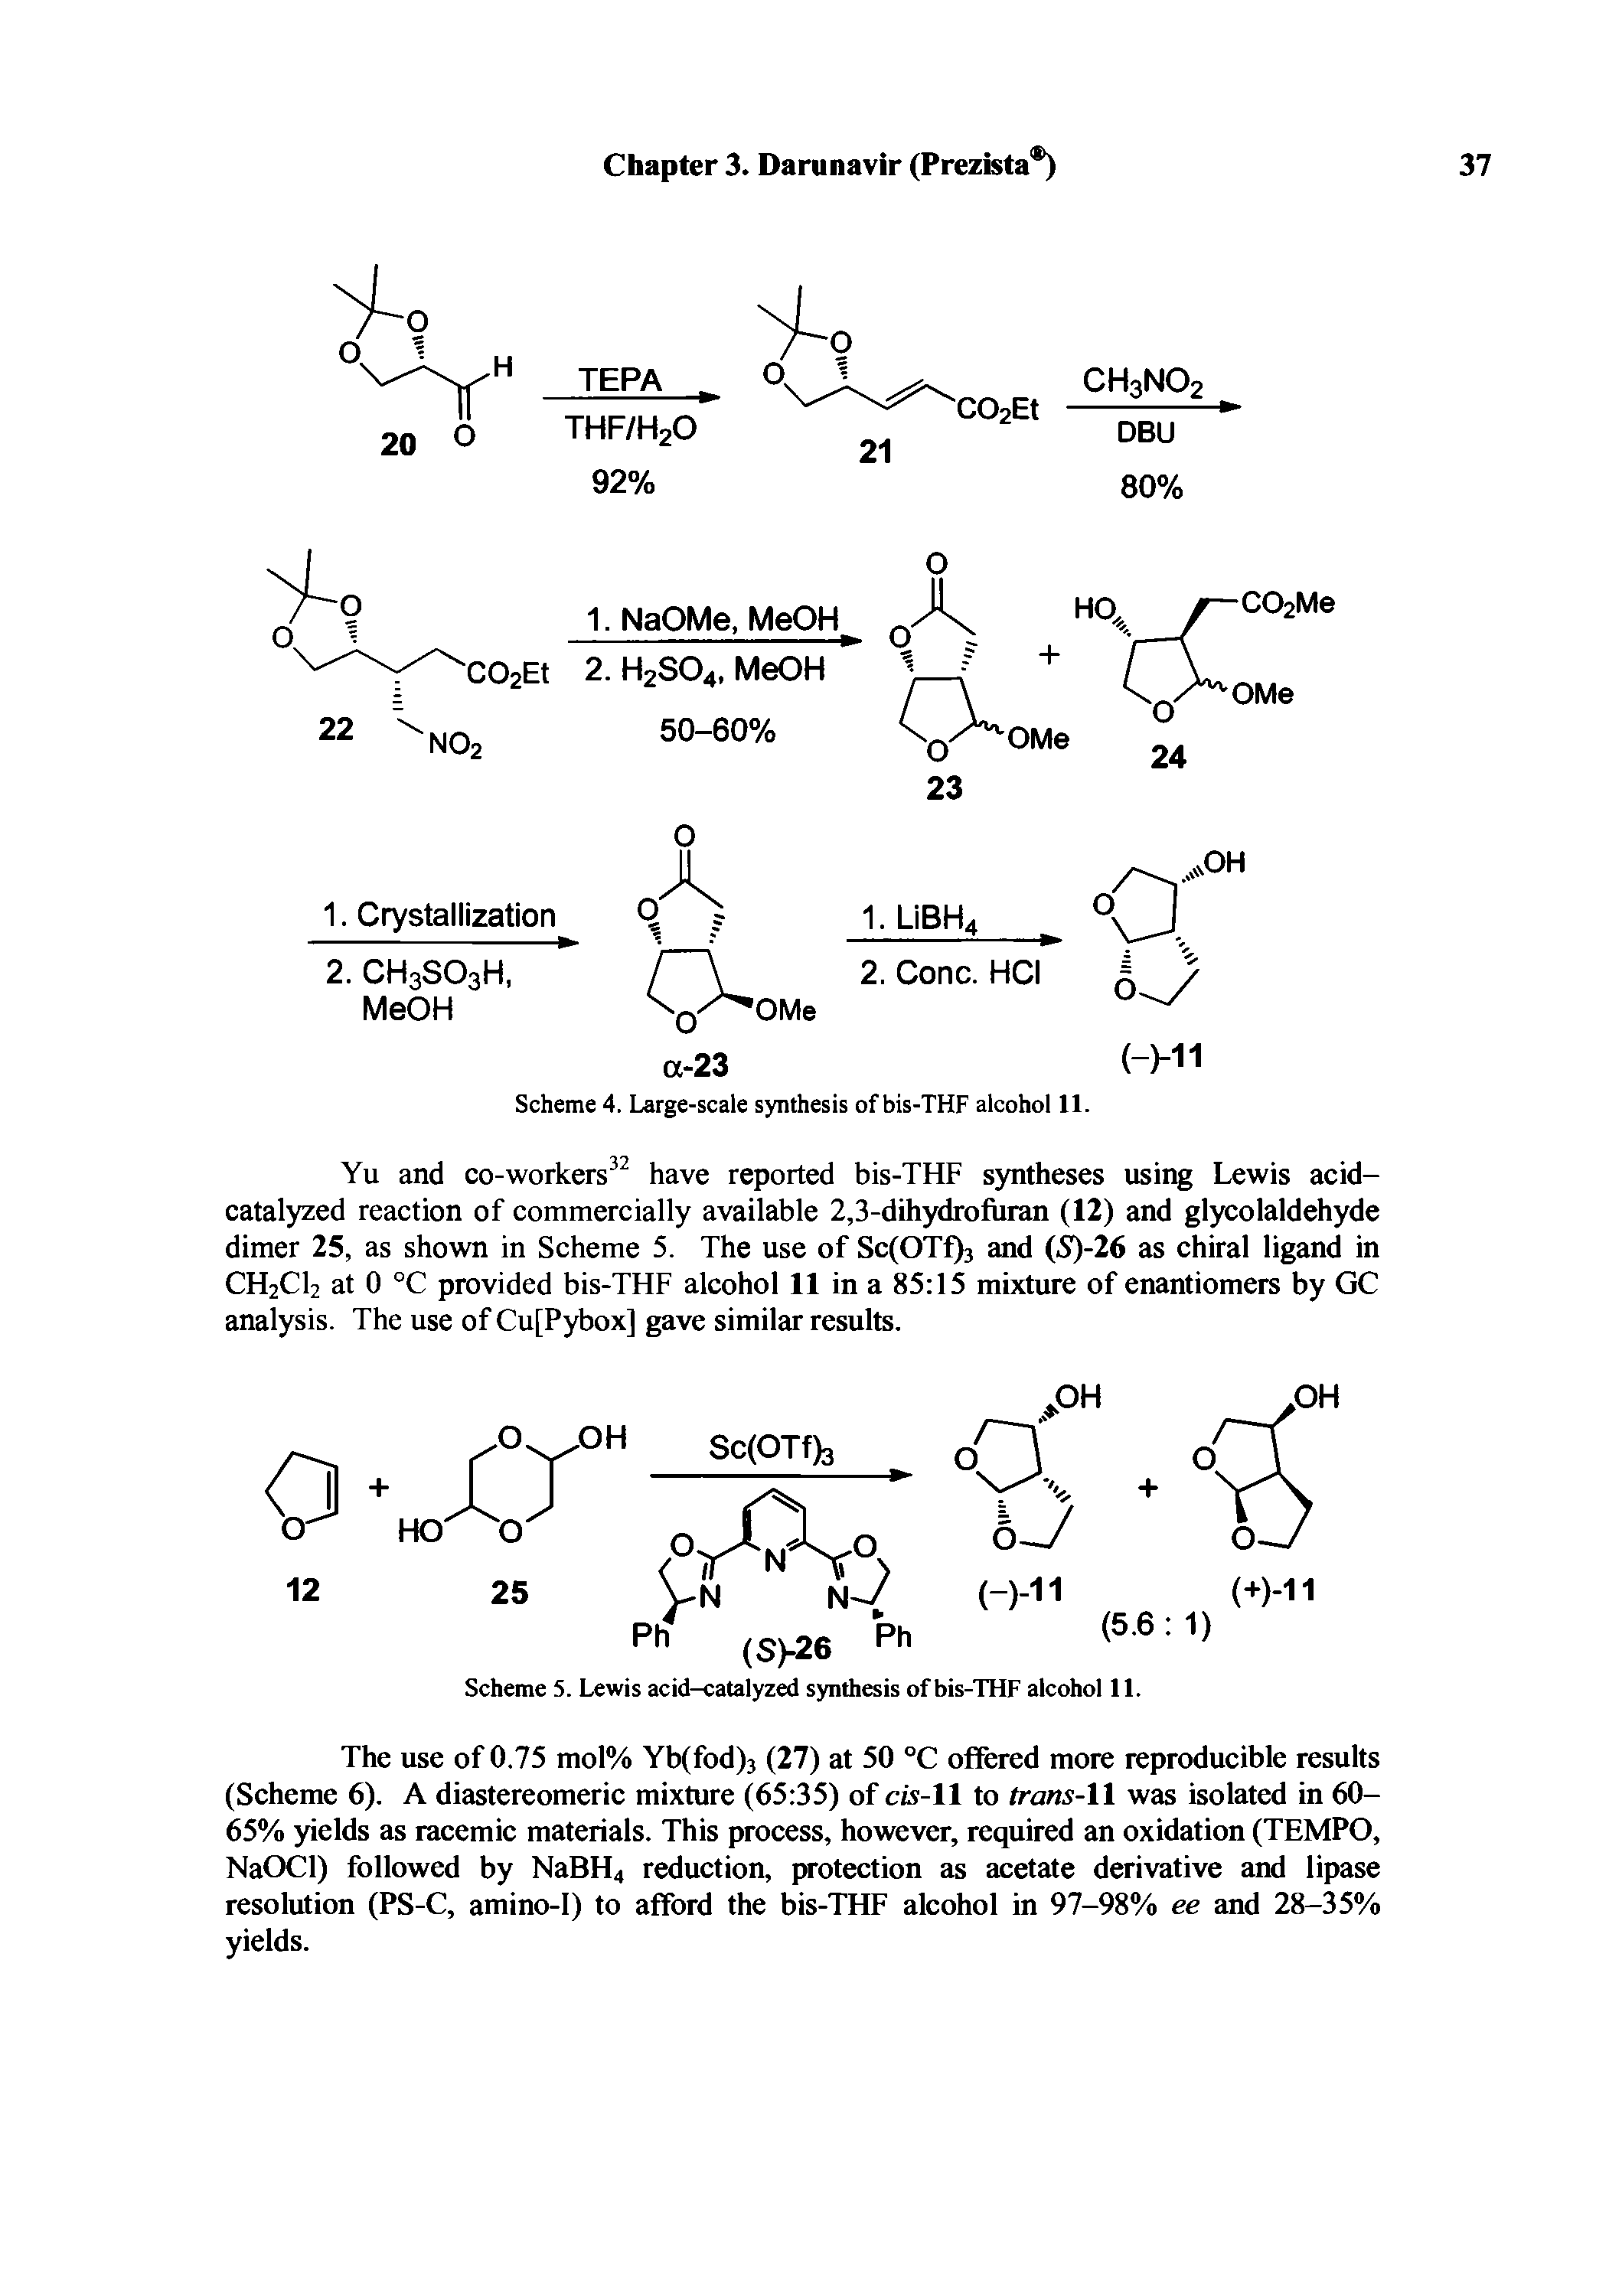 Scheme 5. Lewis acid-catalyzed synthesis of bis-THF alcohol 11.